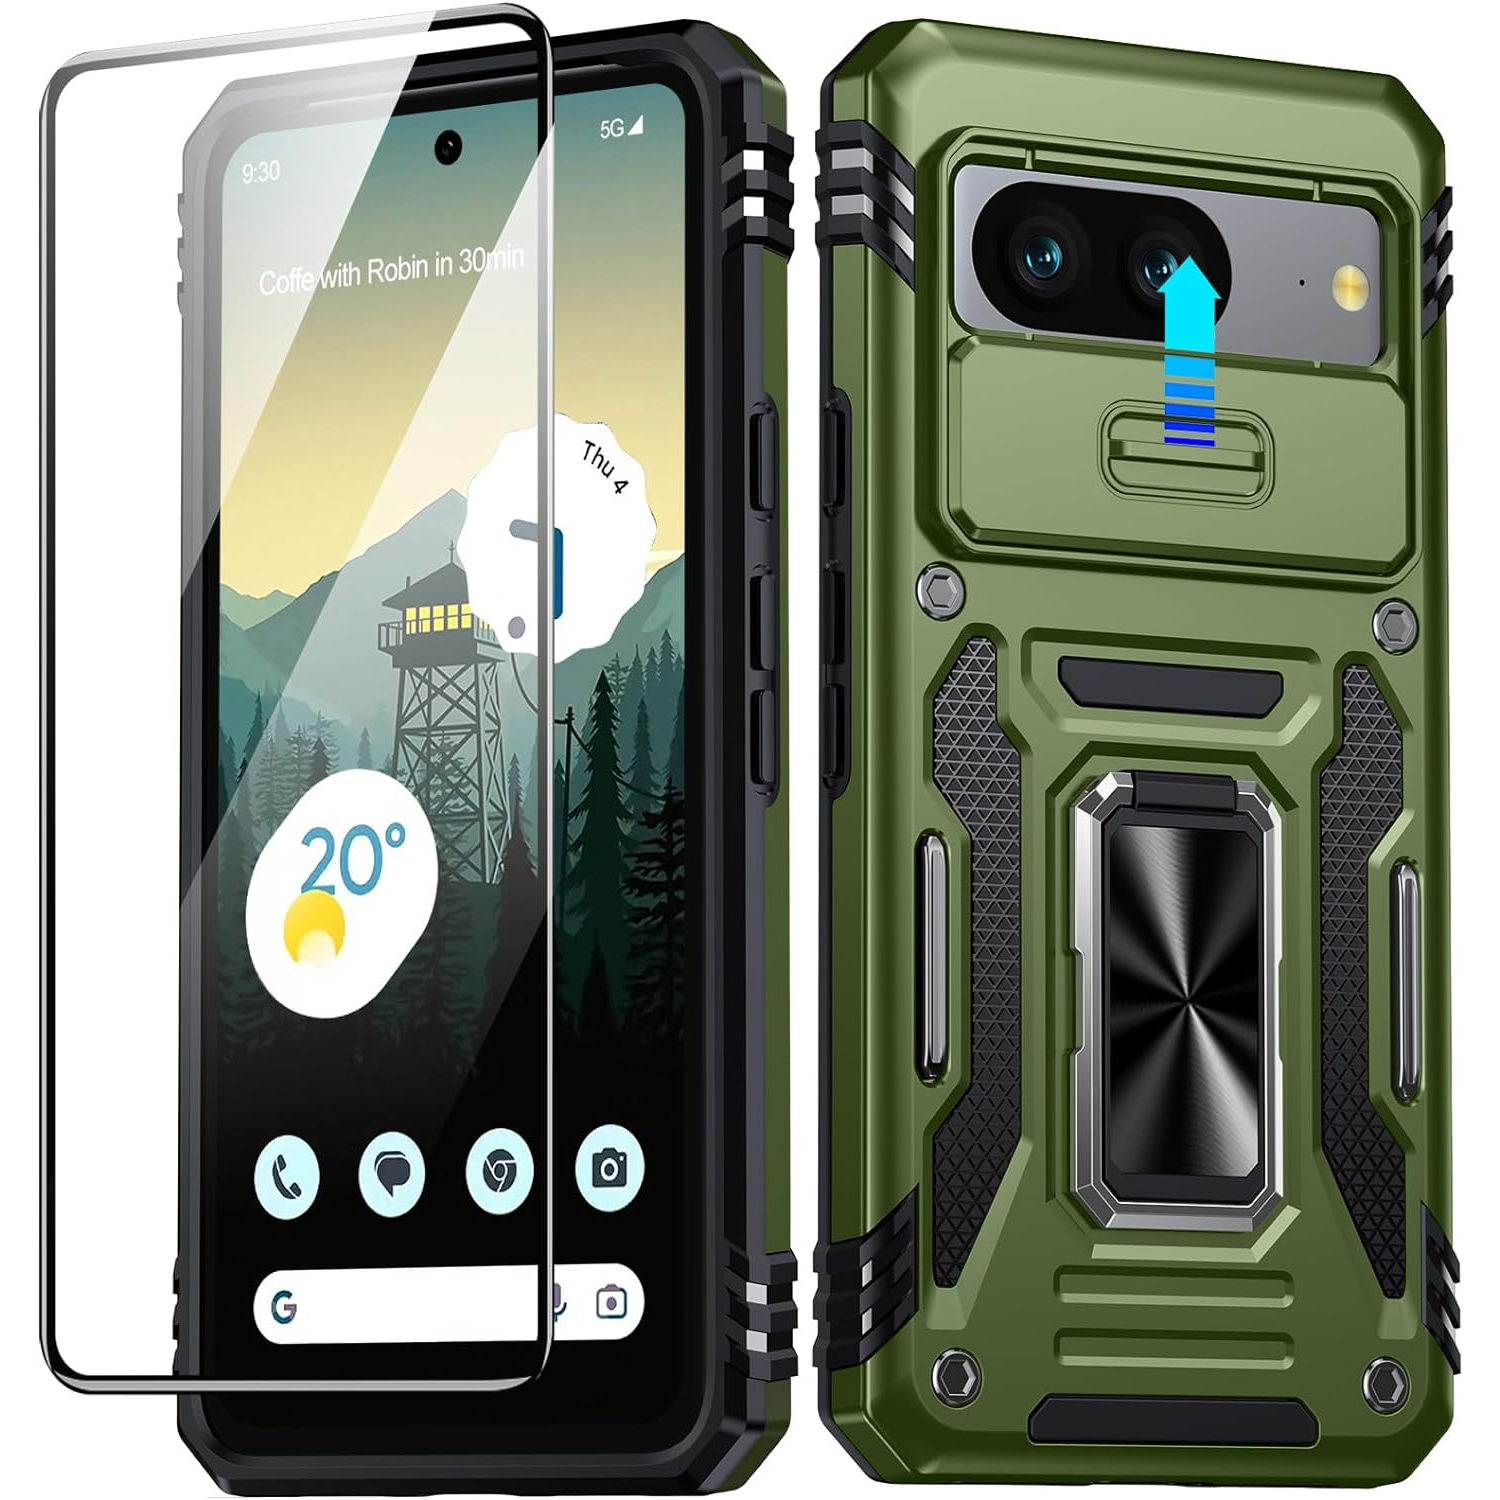 antshare case for pixel 8, front and back views